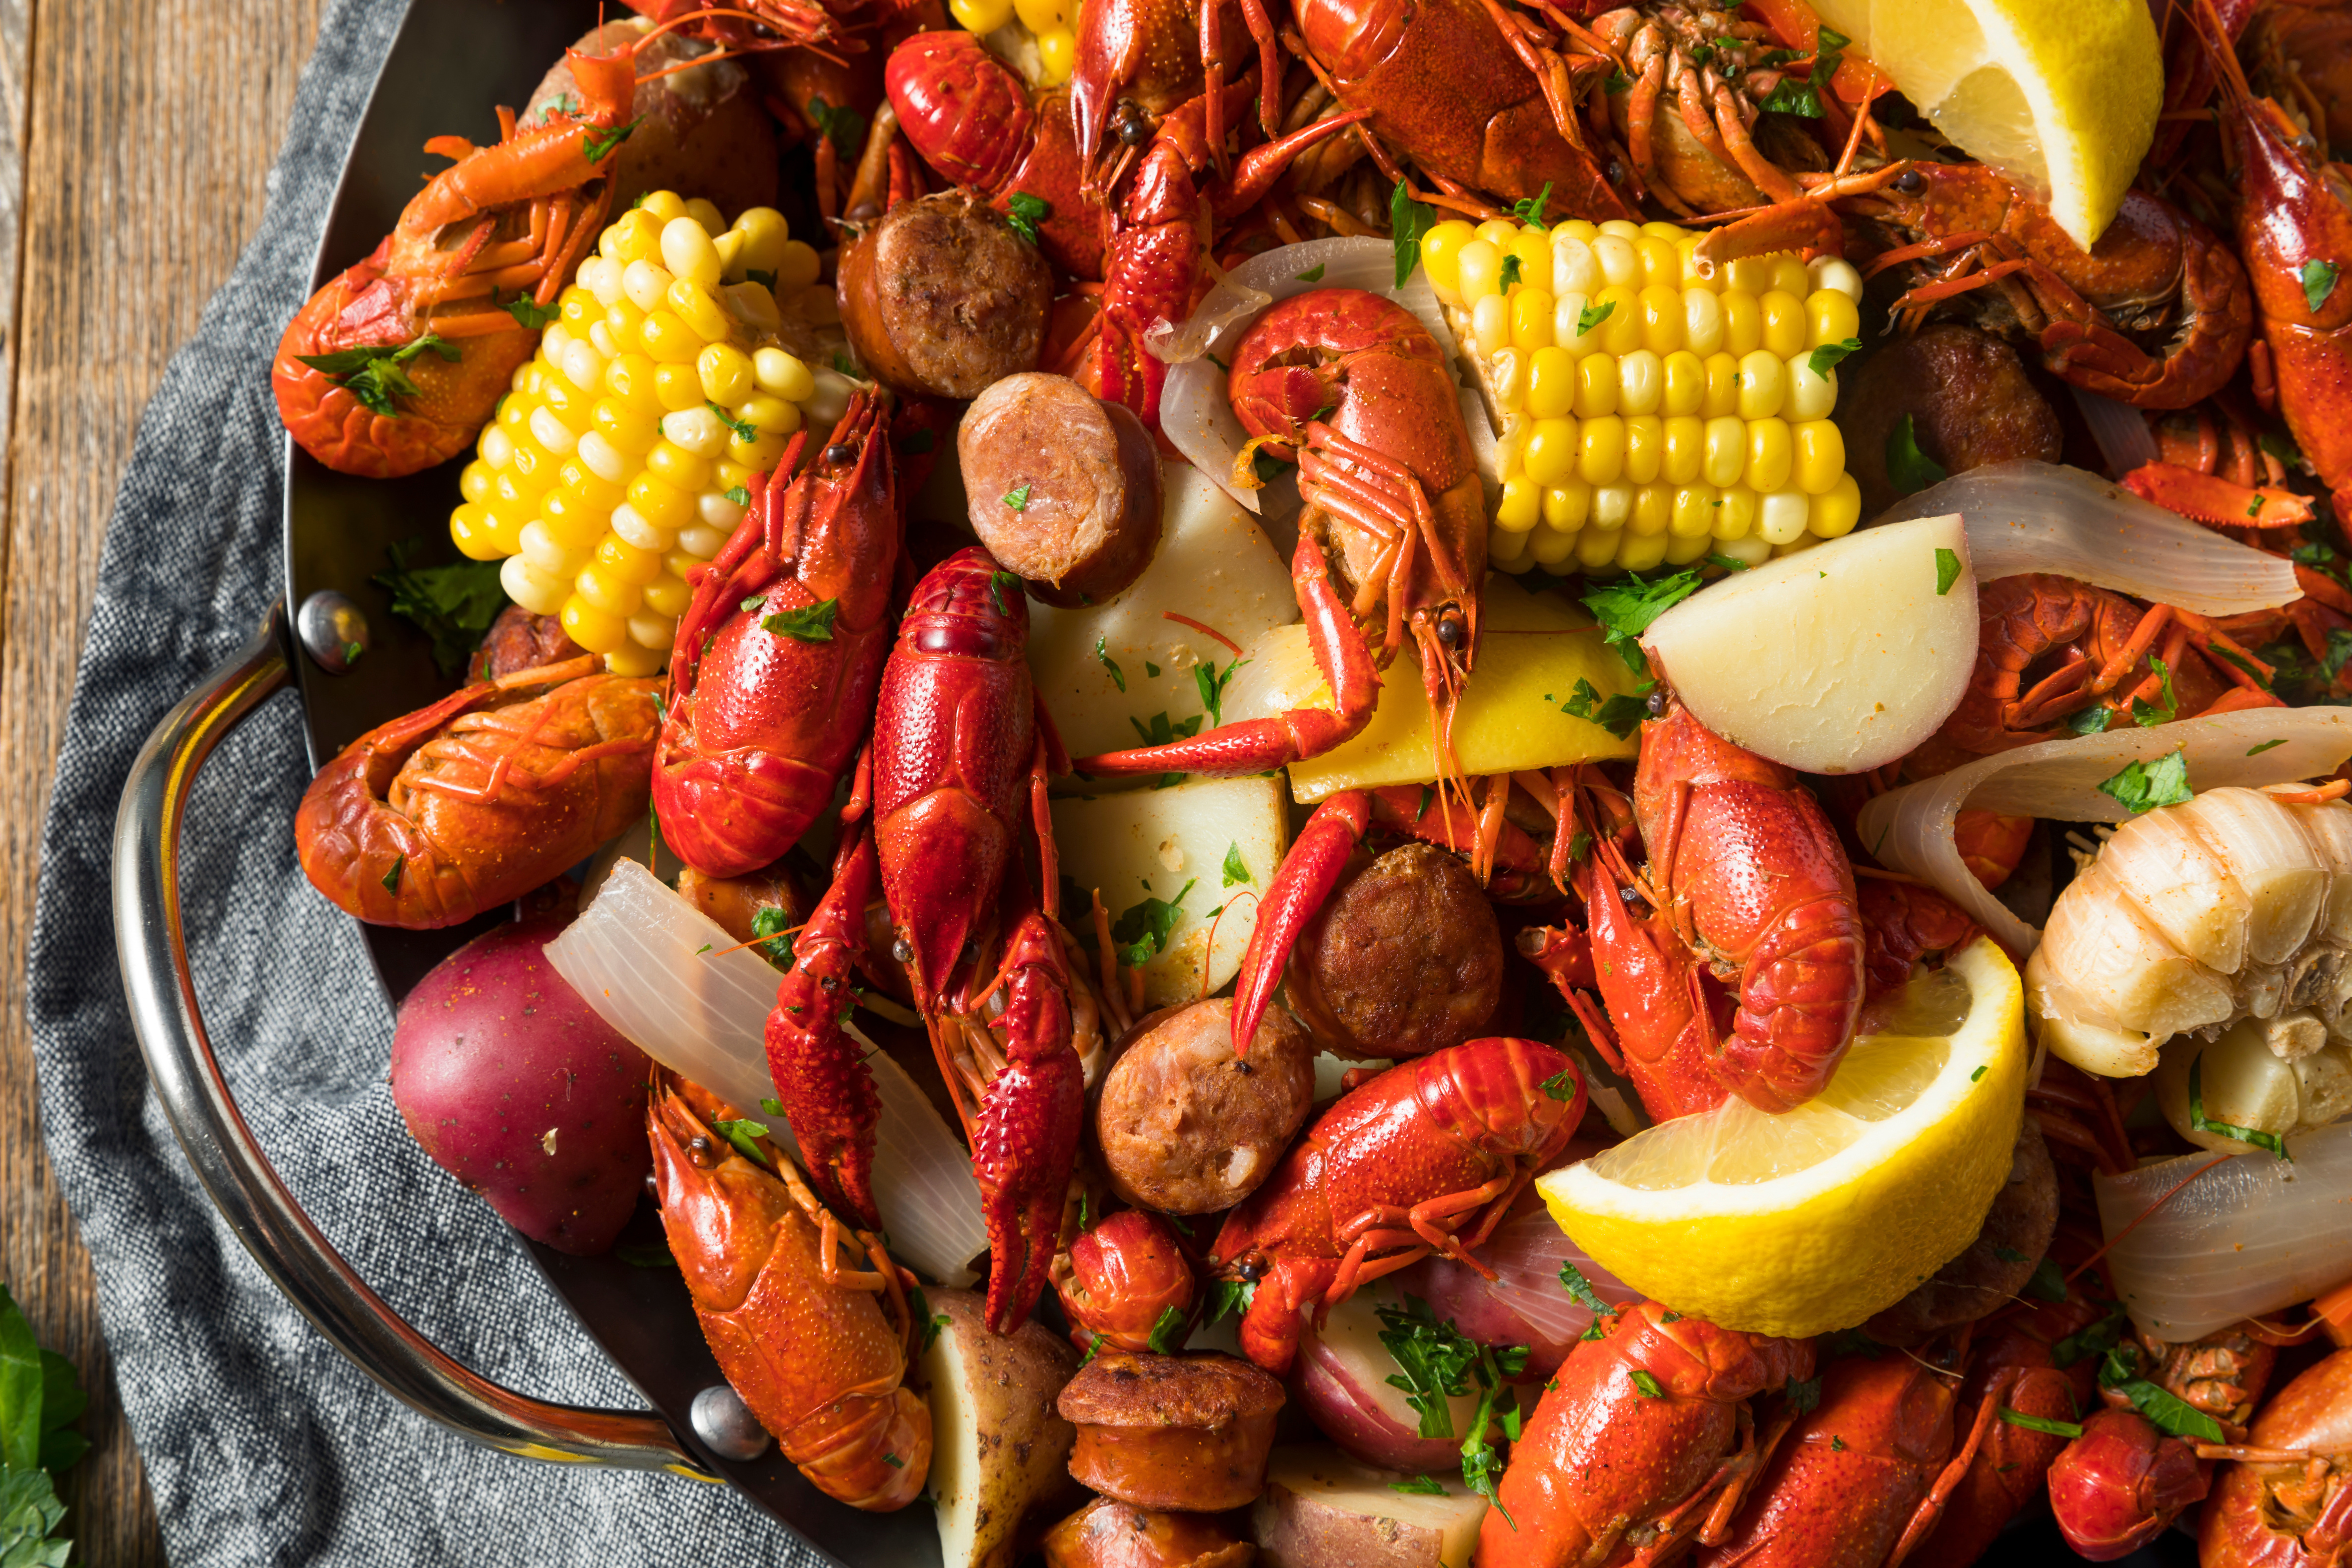 Seafood Boil Party Ideas: Your Guide to Planning a Tasty Event